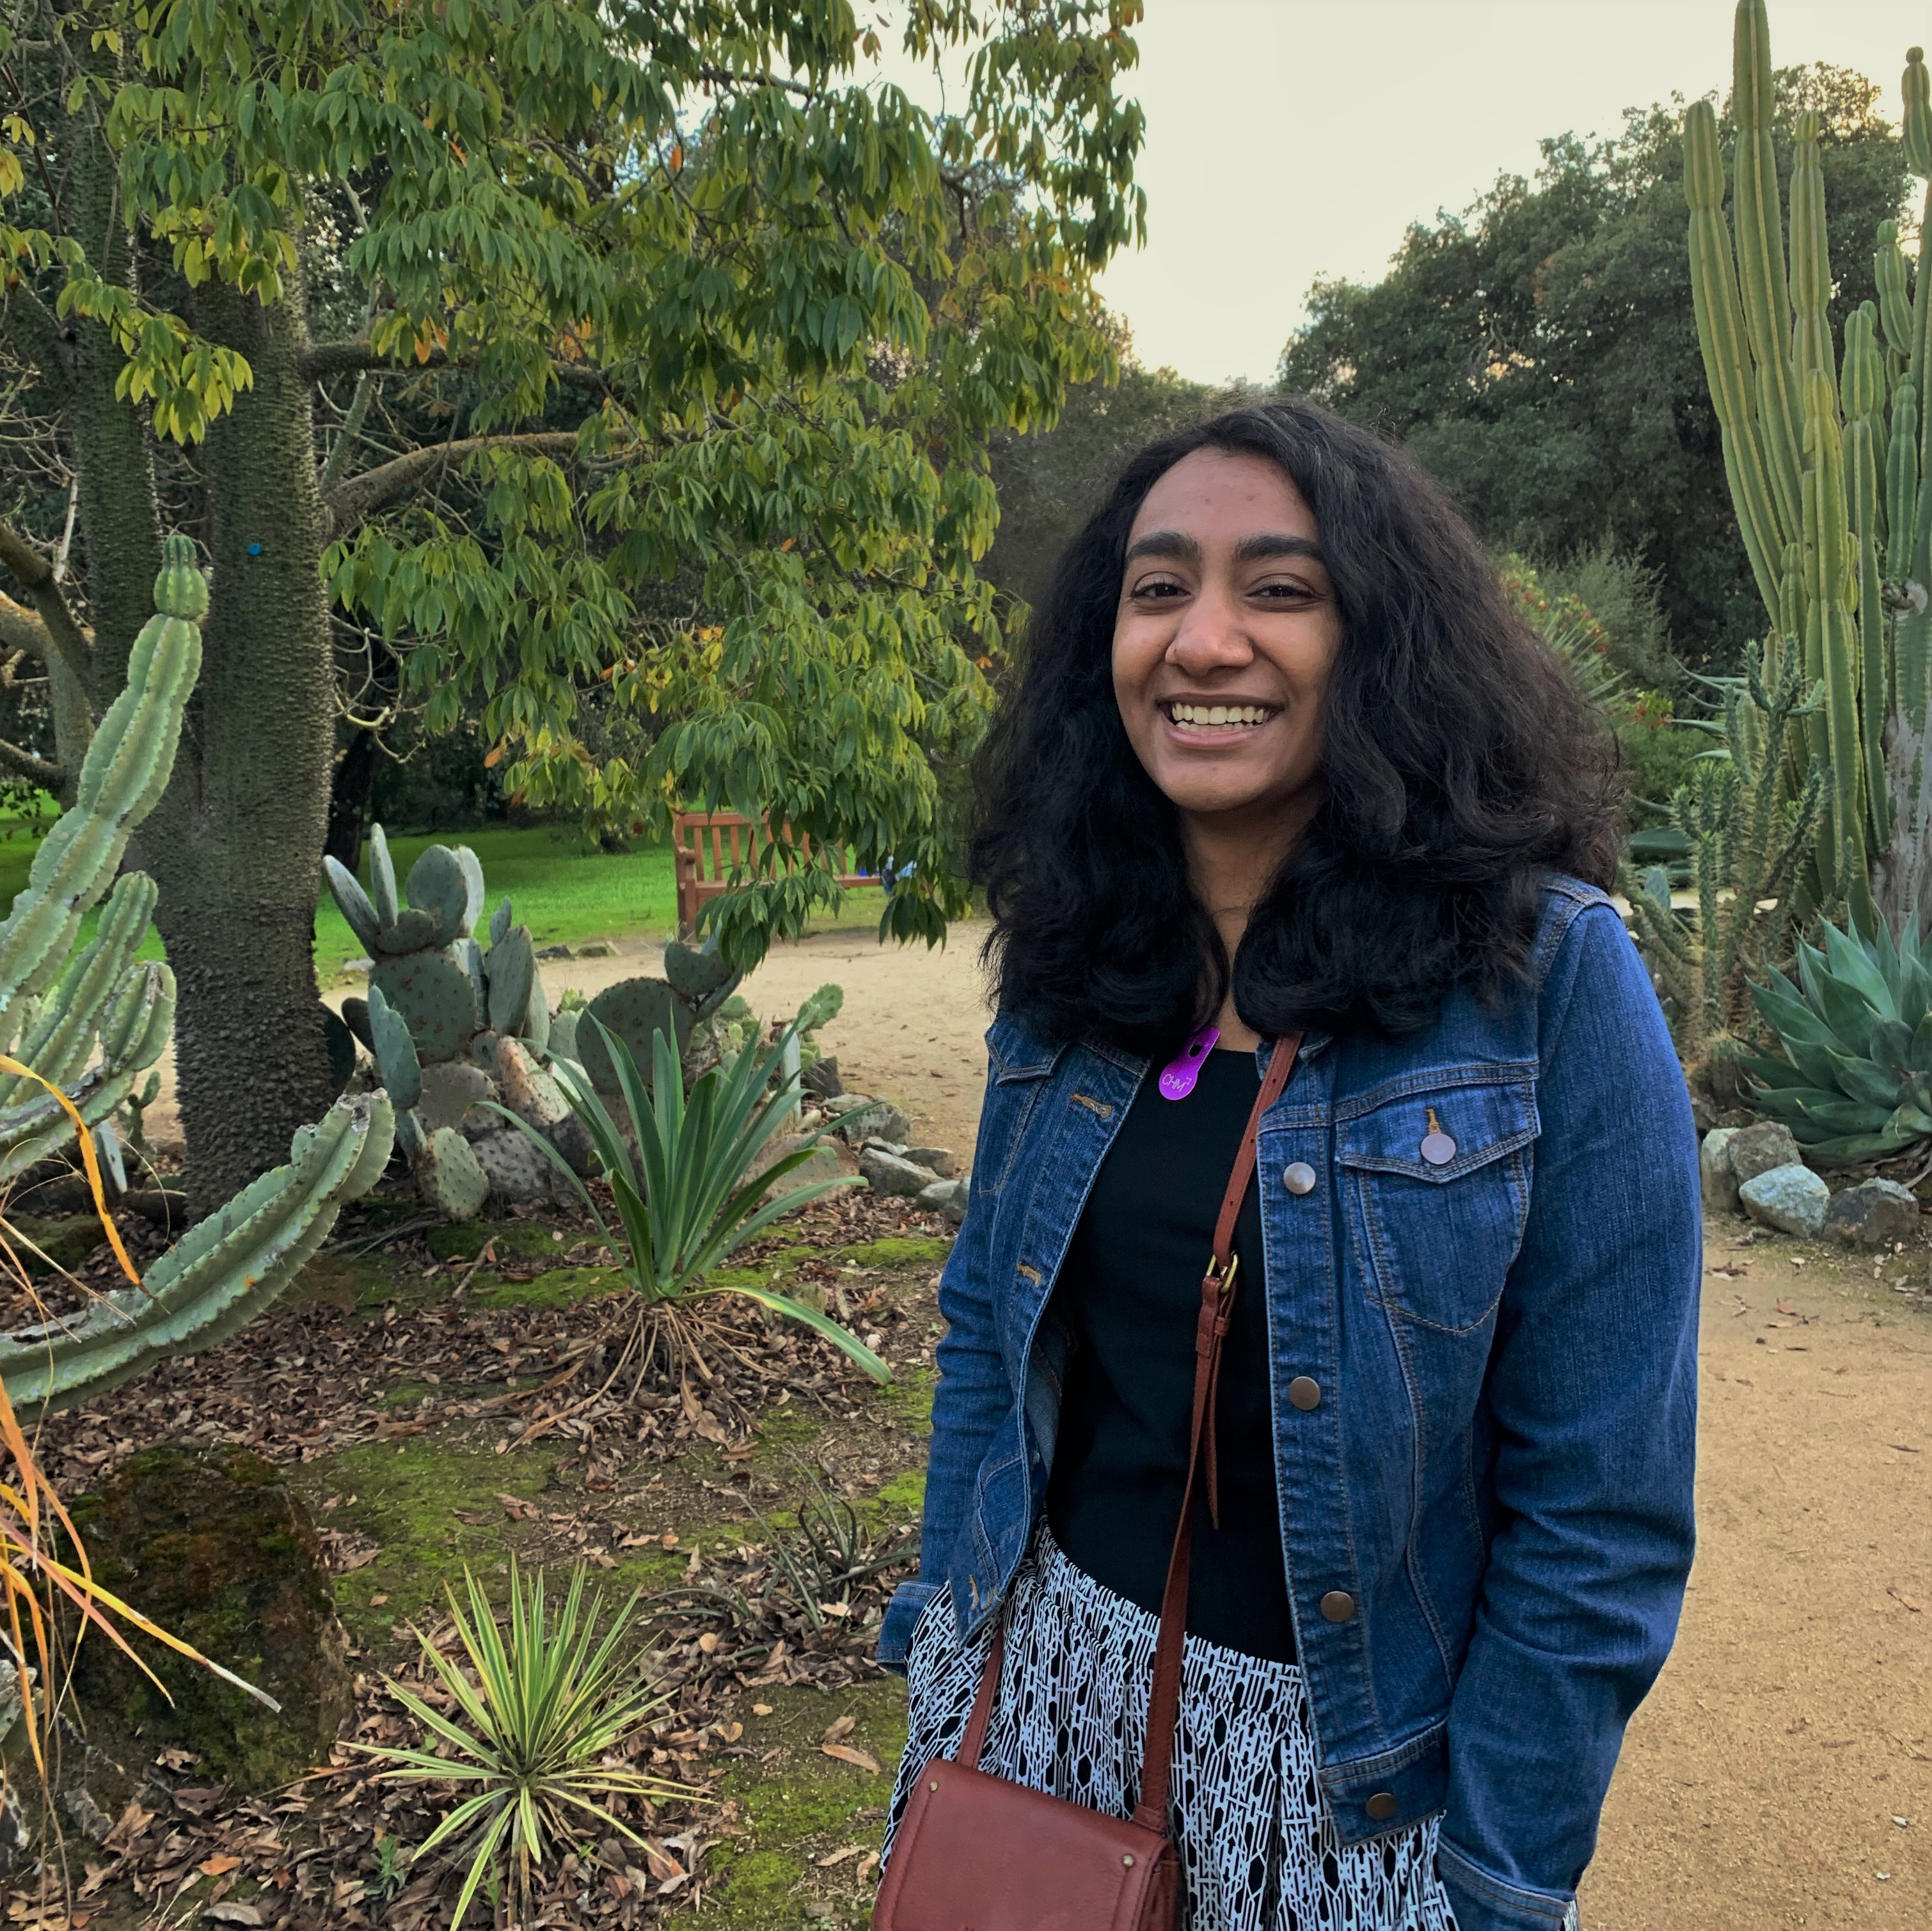 Picture of Priya with Background of Cactus Garden